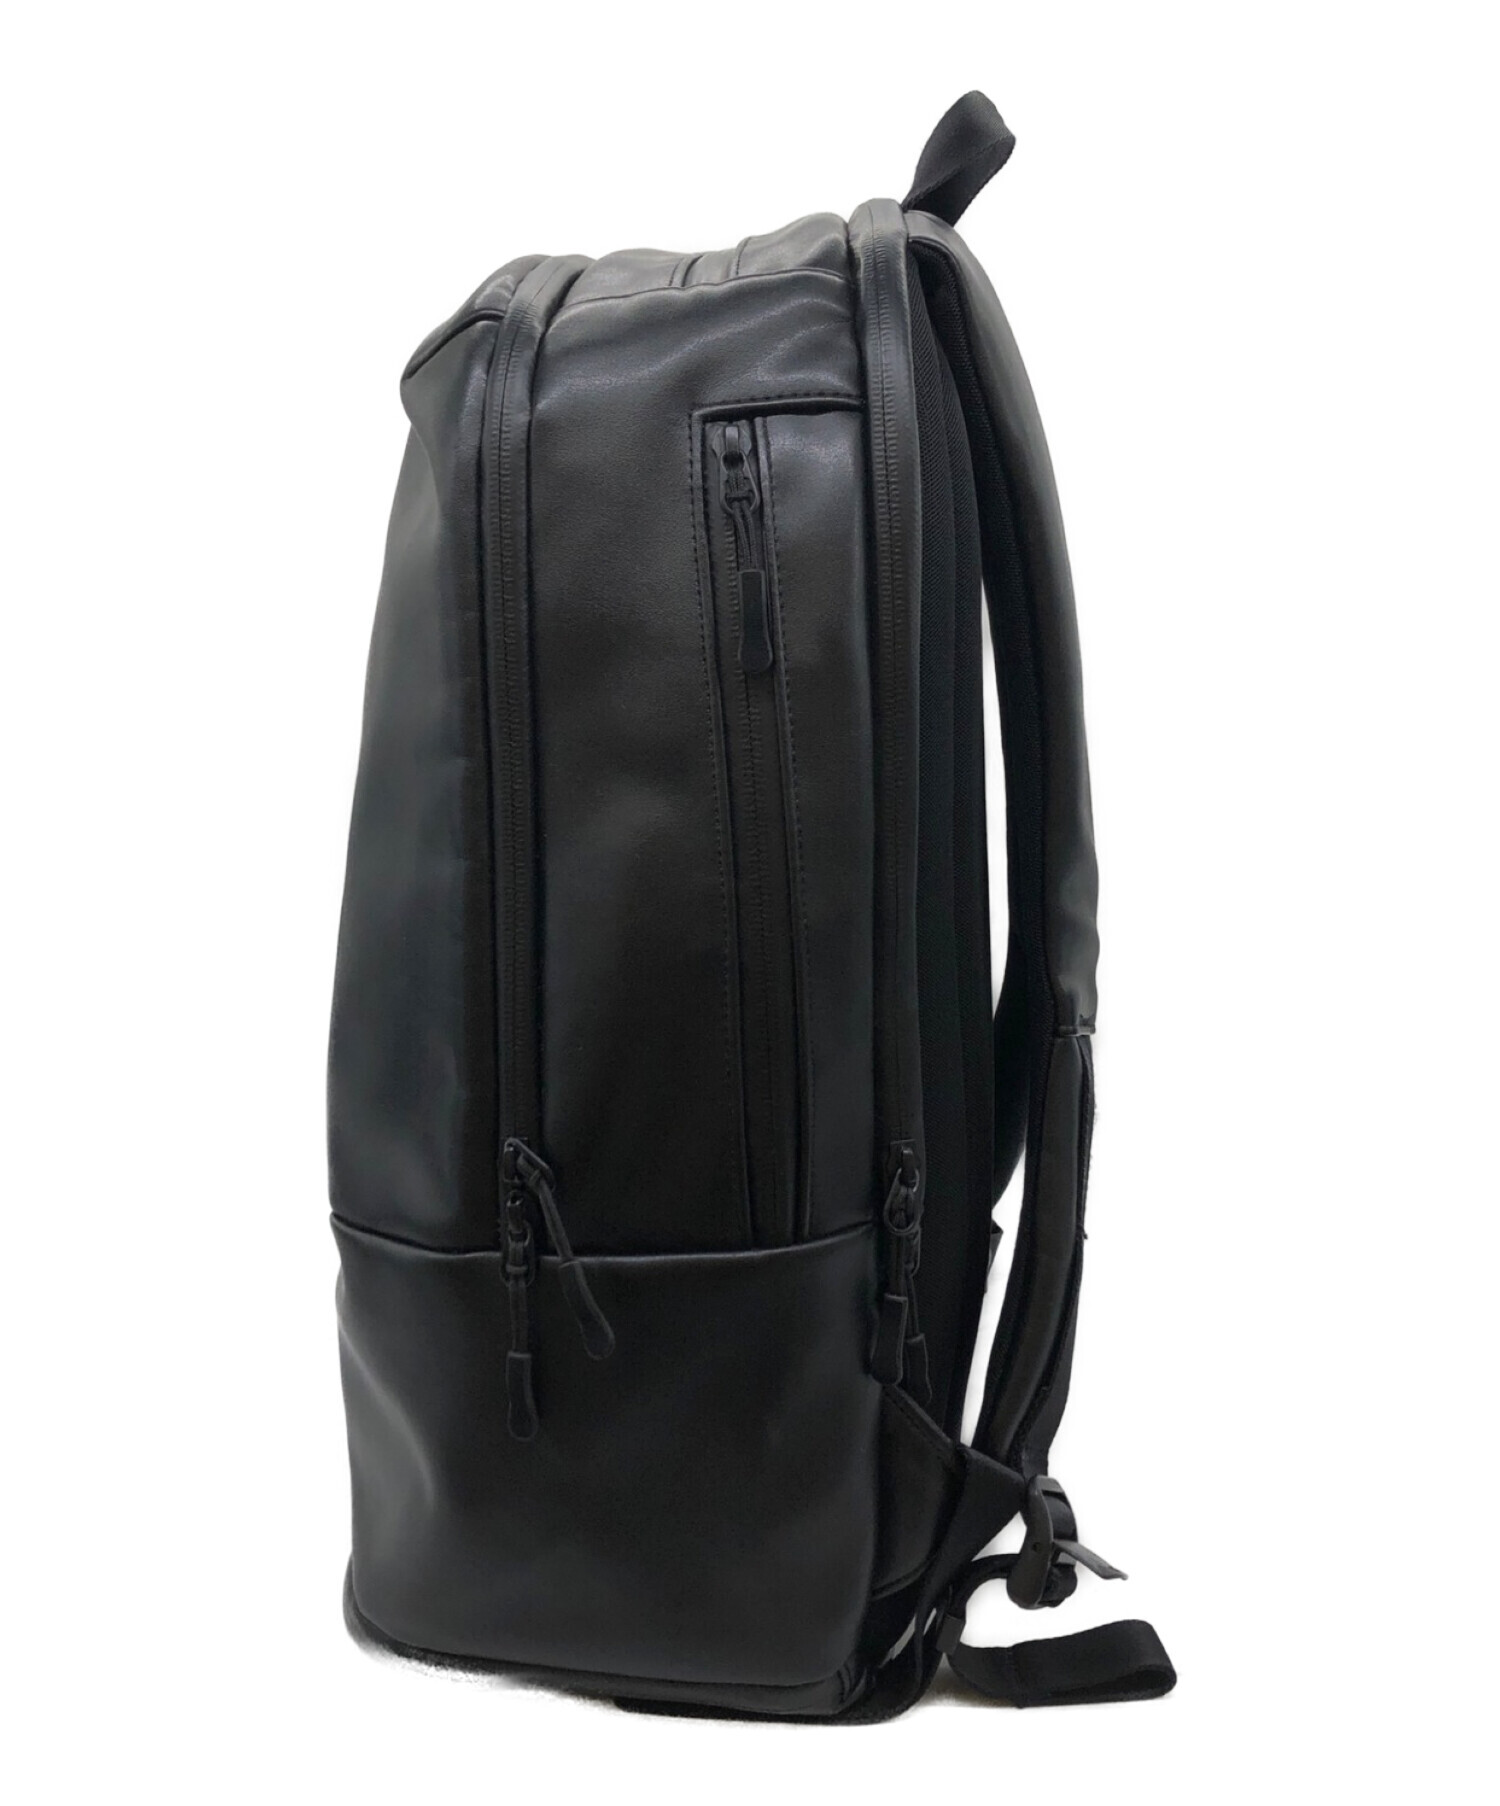 UNITED ARROWS (ユナイテッドアローズ) Synthetic Leather Backpack ブラック